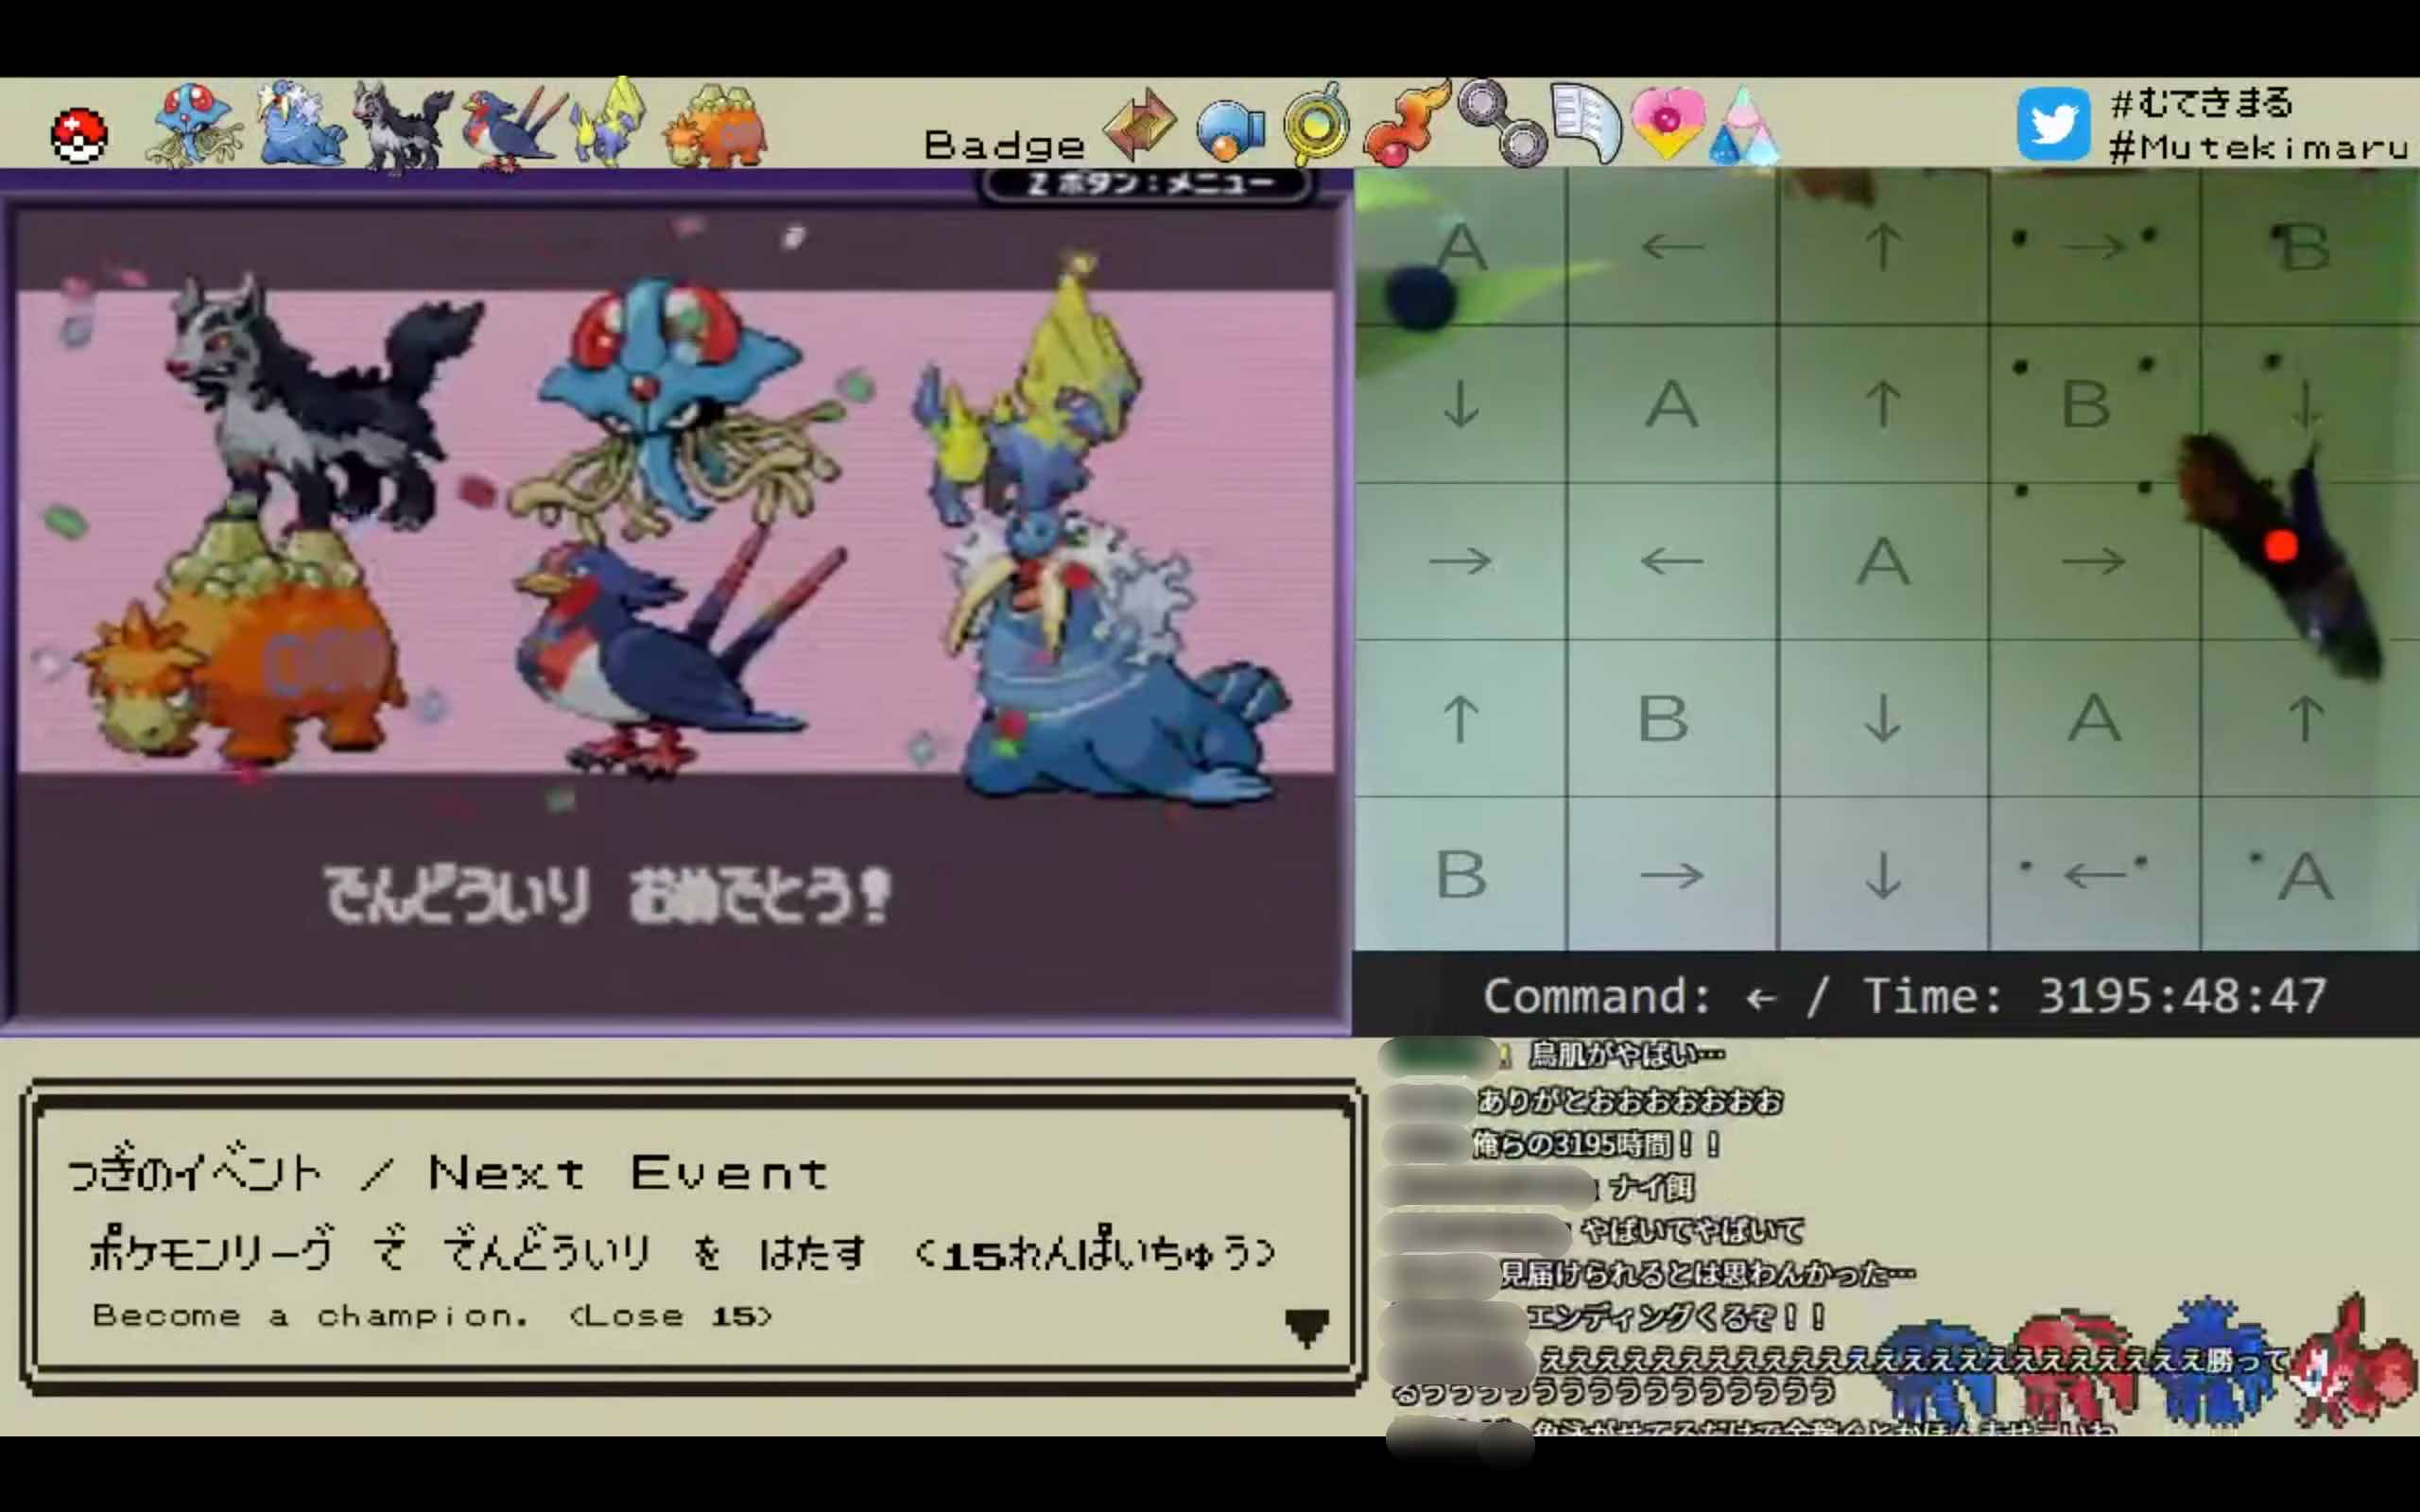 A group of fish playing Pokemon Sapphire finally beat the game after a 3100-hour journey